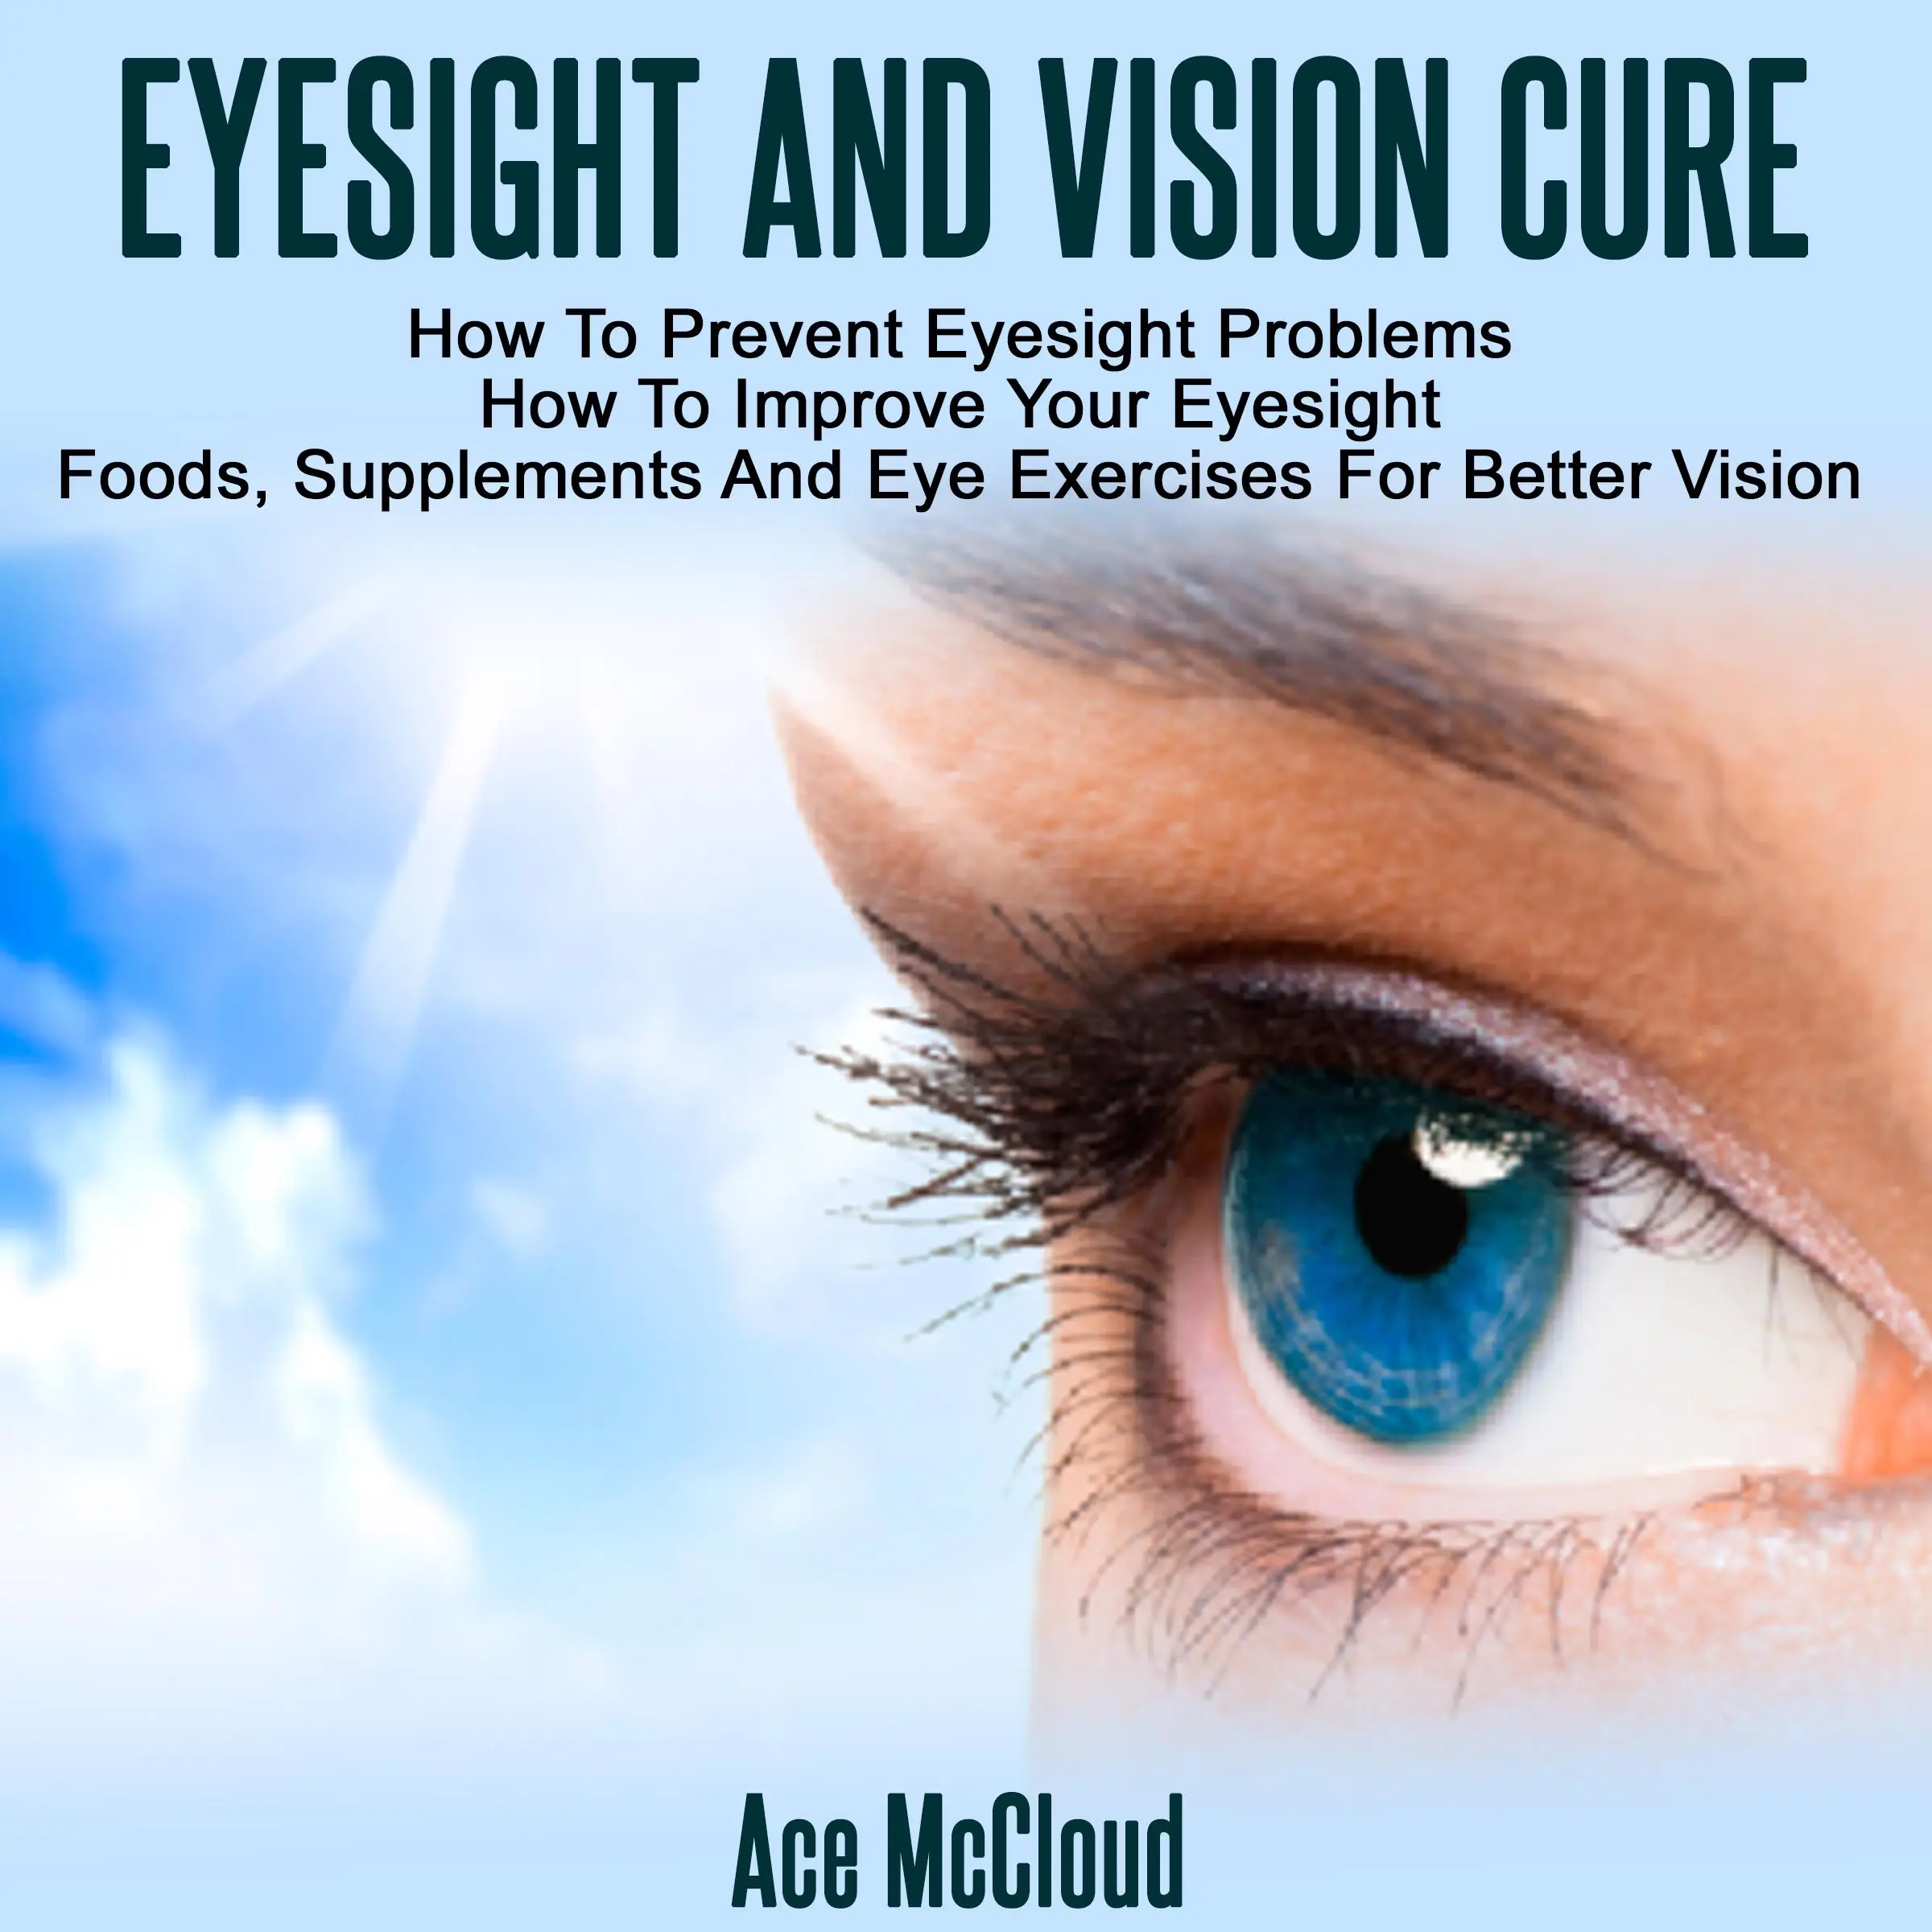 Eyesight And Vision Cure: How To Prevent Eyesight Problems: How To Improve Your Eyesight: Foods, Supplements And Eye Exercises For Better Vision Audiobook by Ace McCloud